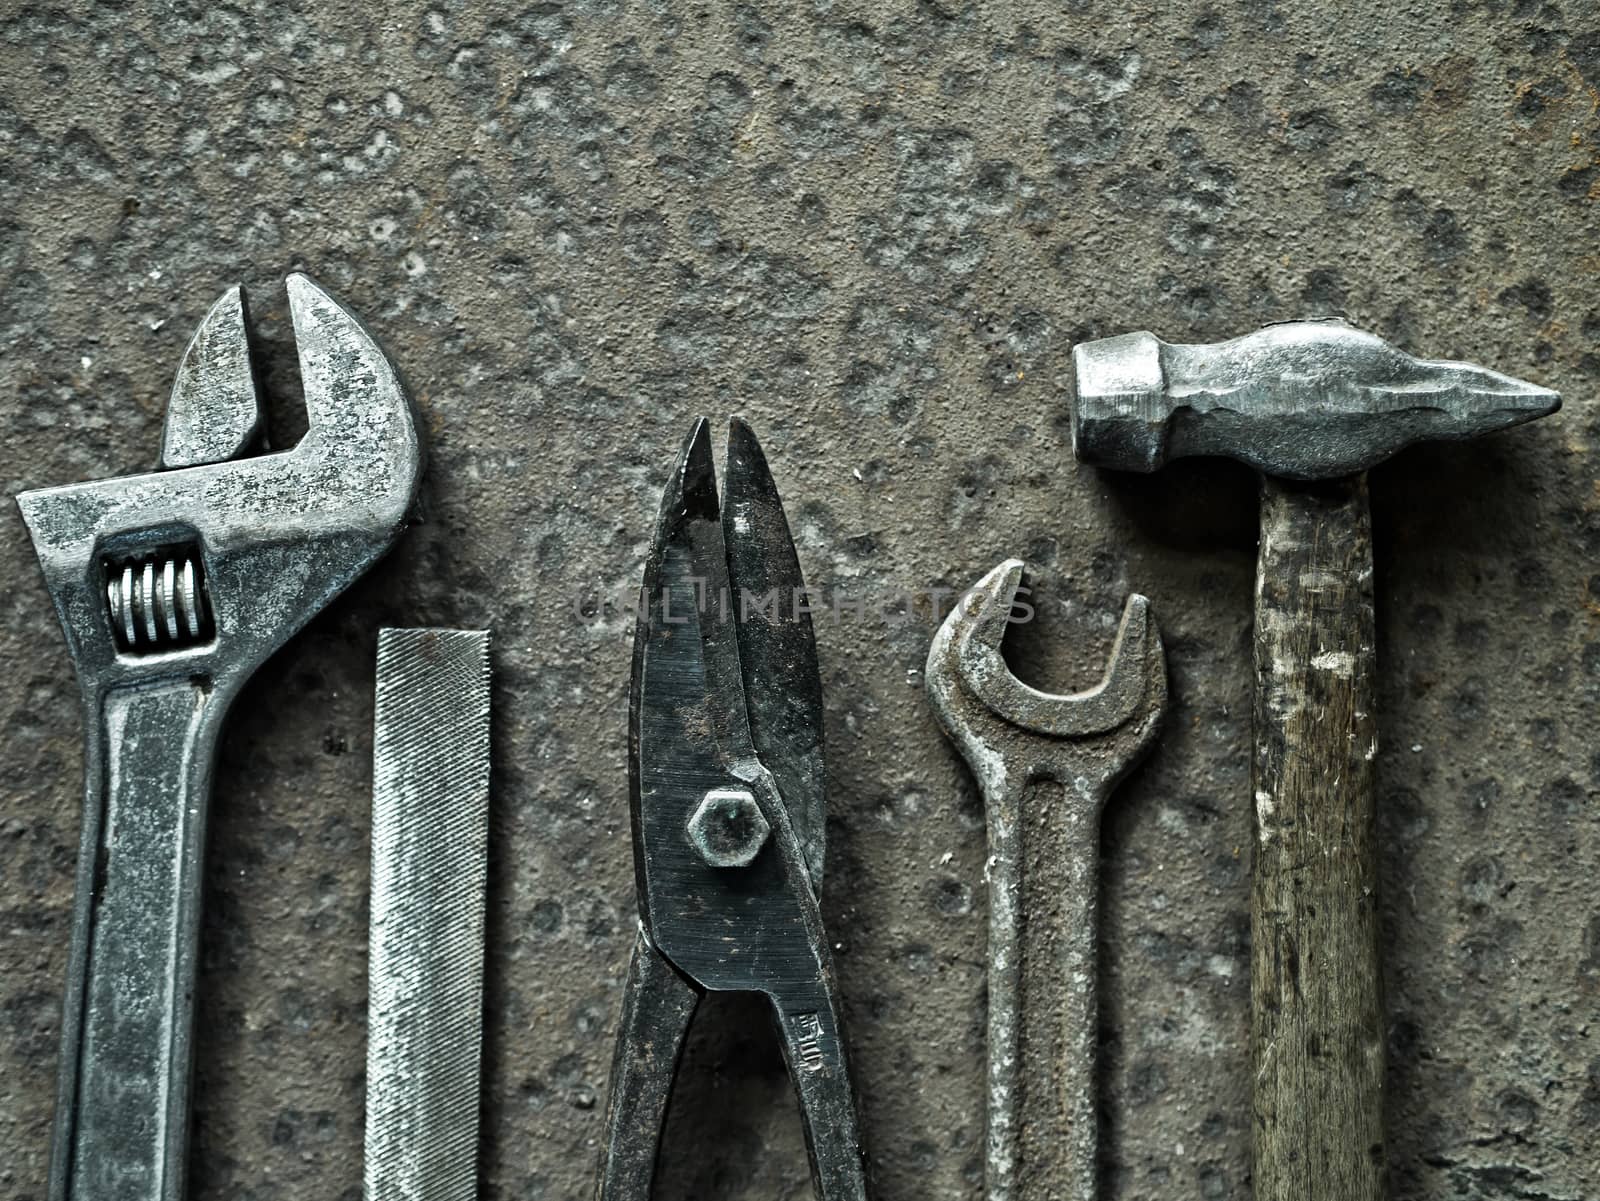 Old tools on a rusty metal background